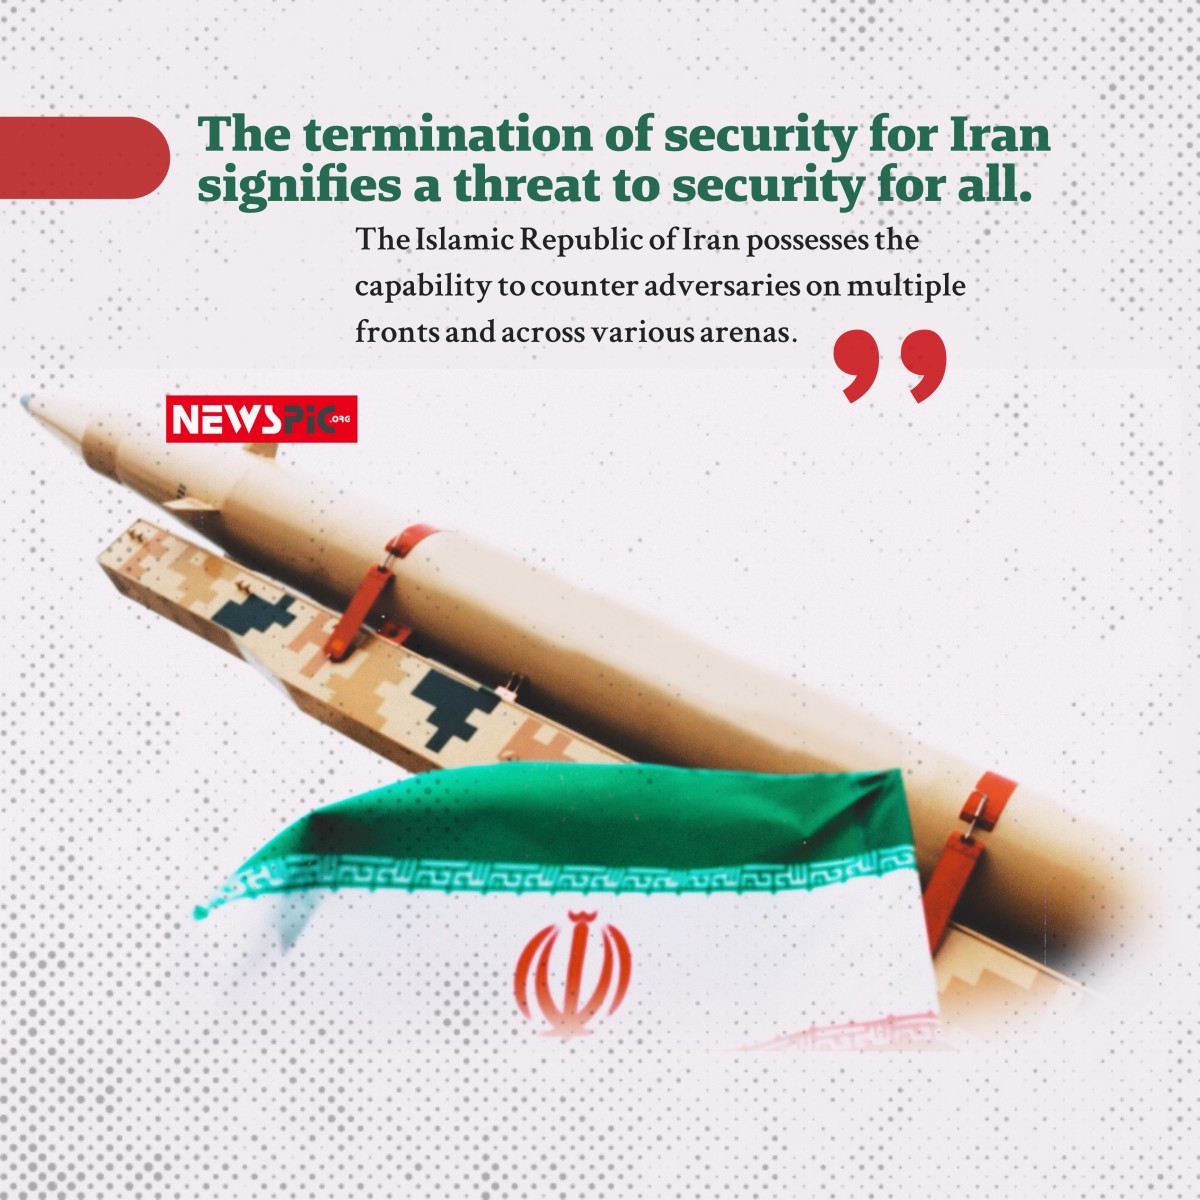 The termination of security for Iran signifies a threat to security for all.